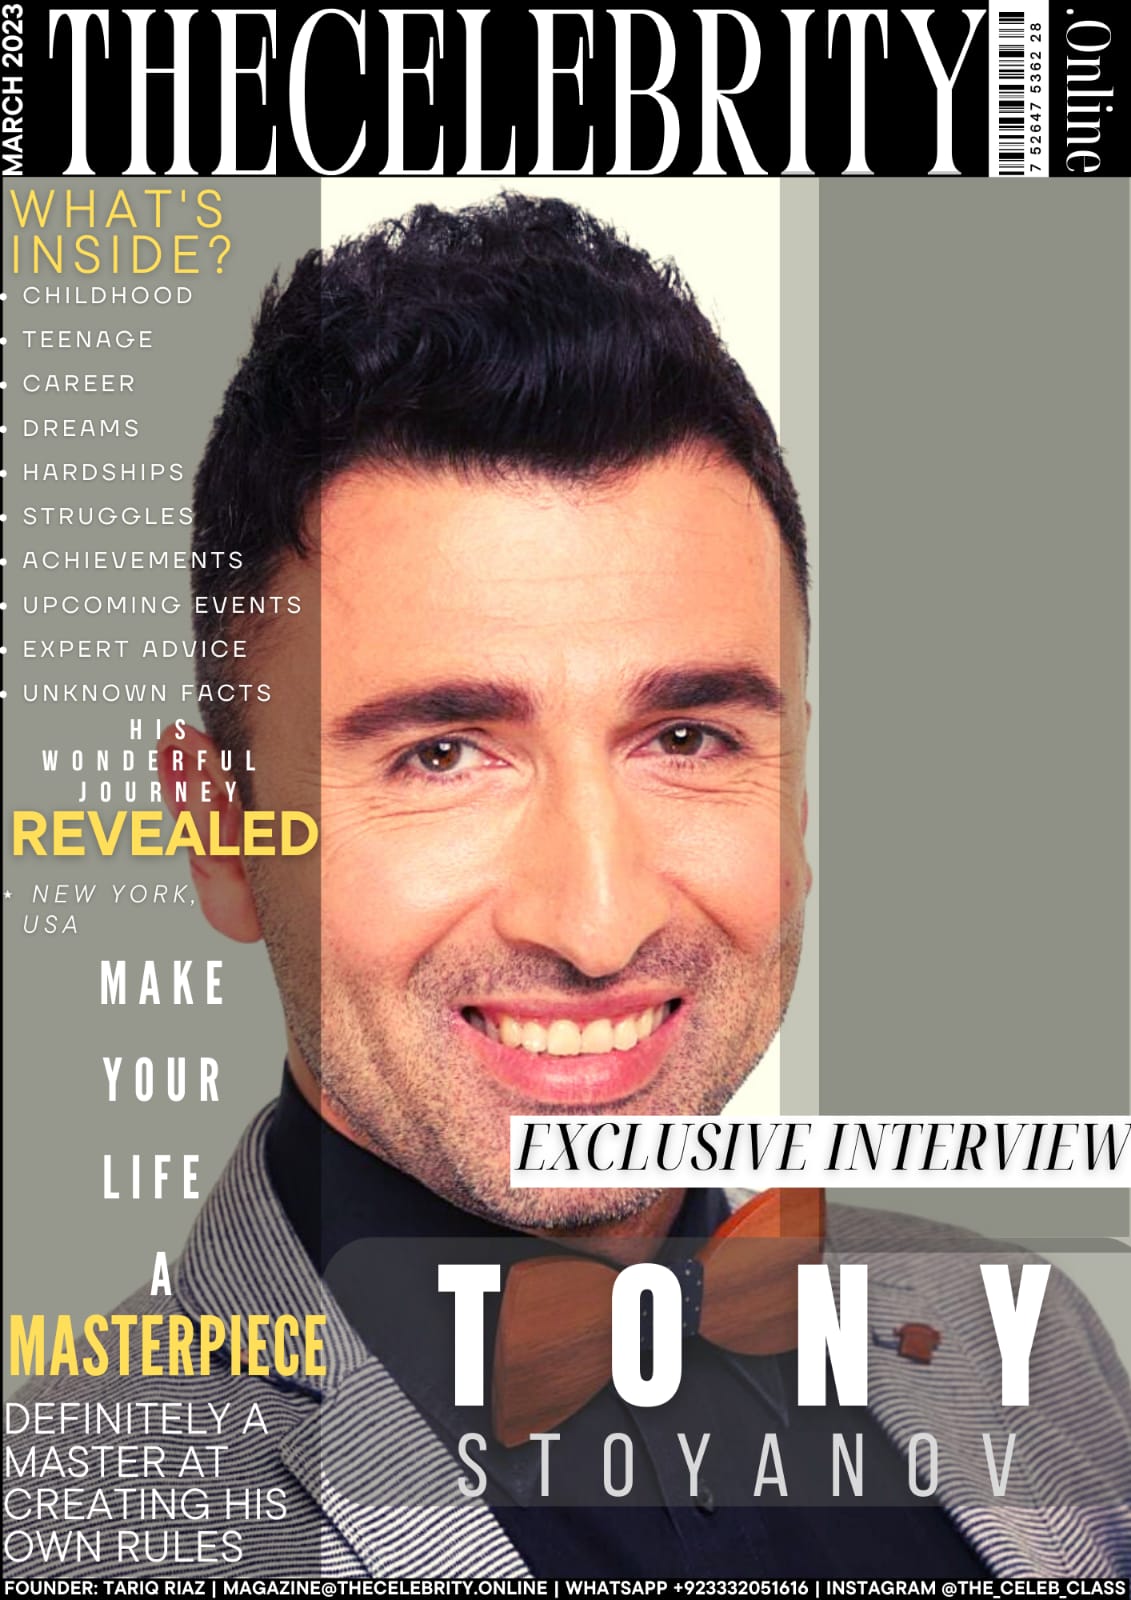 Tony Stoyanov Exclusive Interview – ‘Only Thing That Gives You Lessons Every Day Is Life’